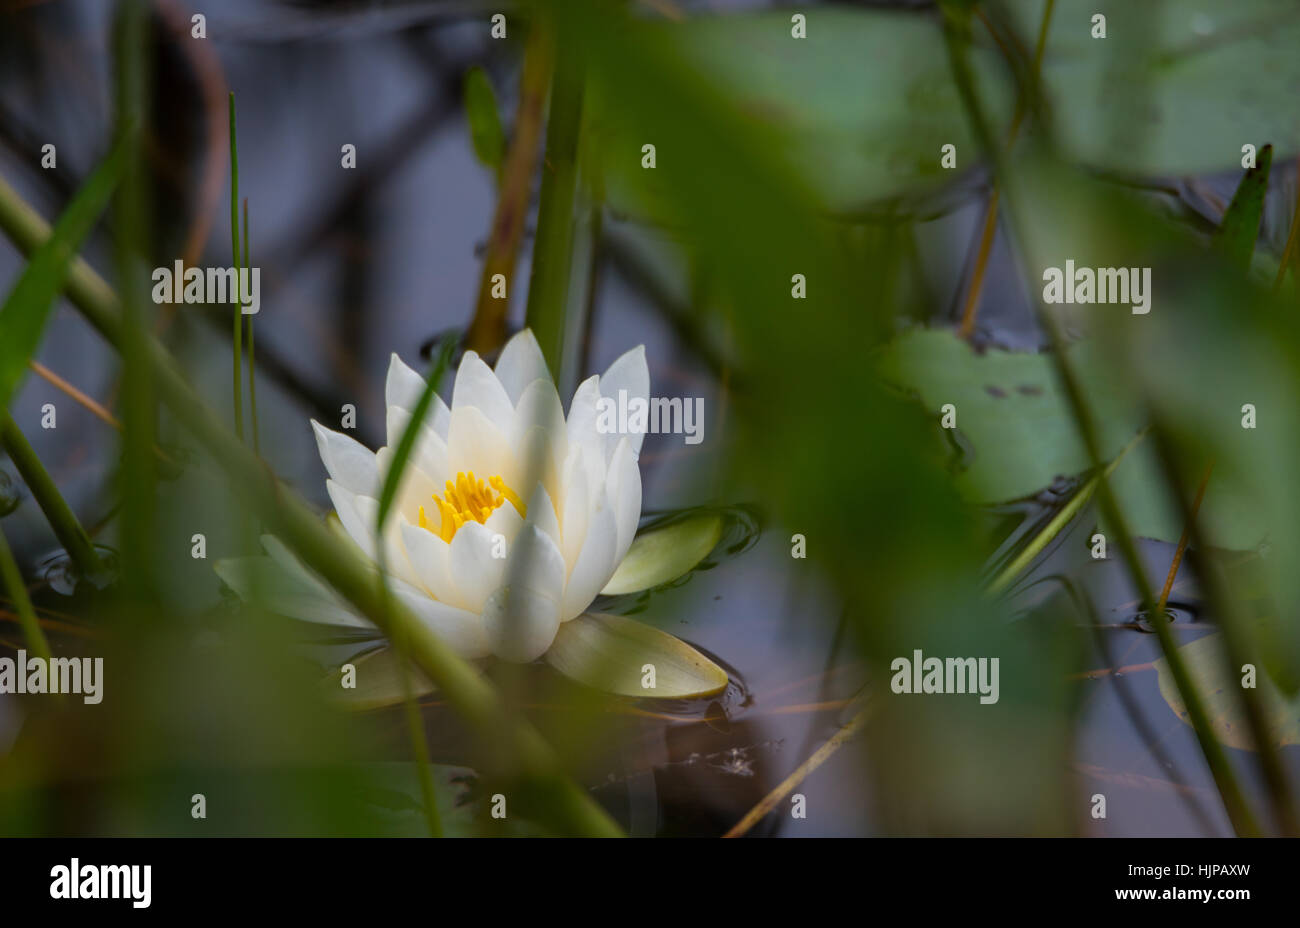 White petals of a floating Nymphaea alba water lily.   Nymphaea alba - wild floating water lily with white petals and yellow stamen. Stock Photo